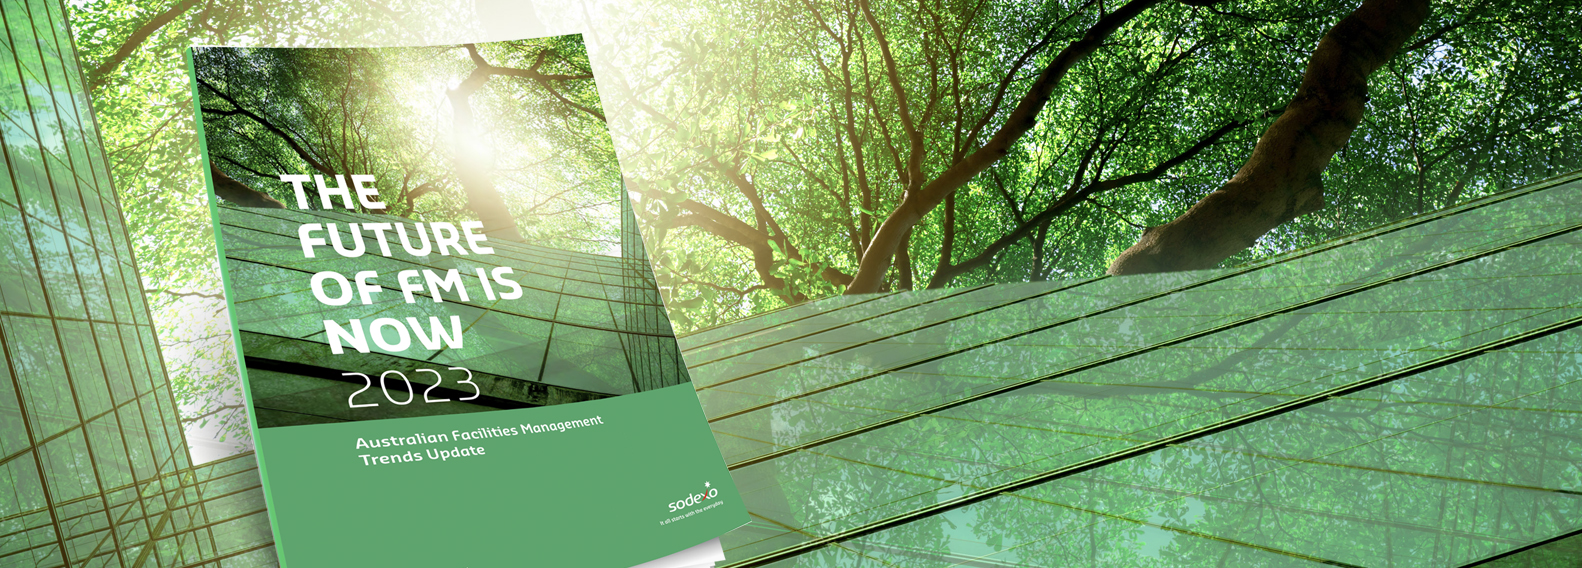 FM Trends Report on modern looking green building as the background